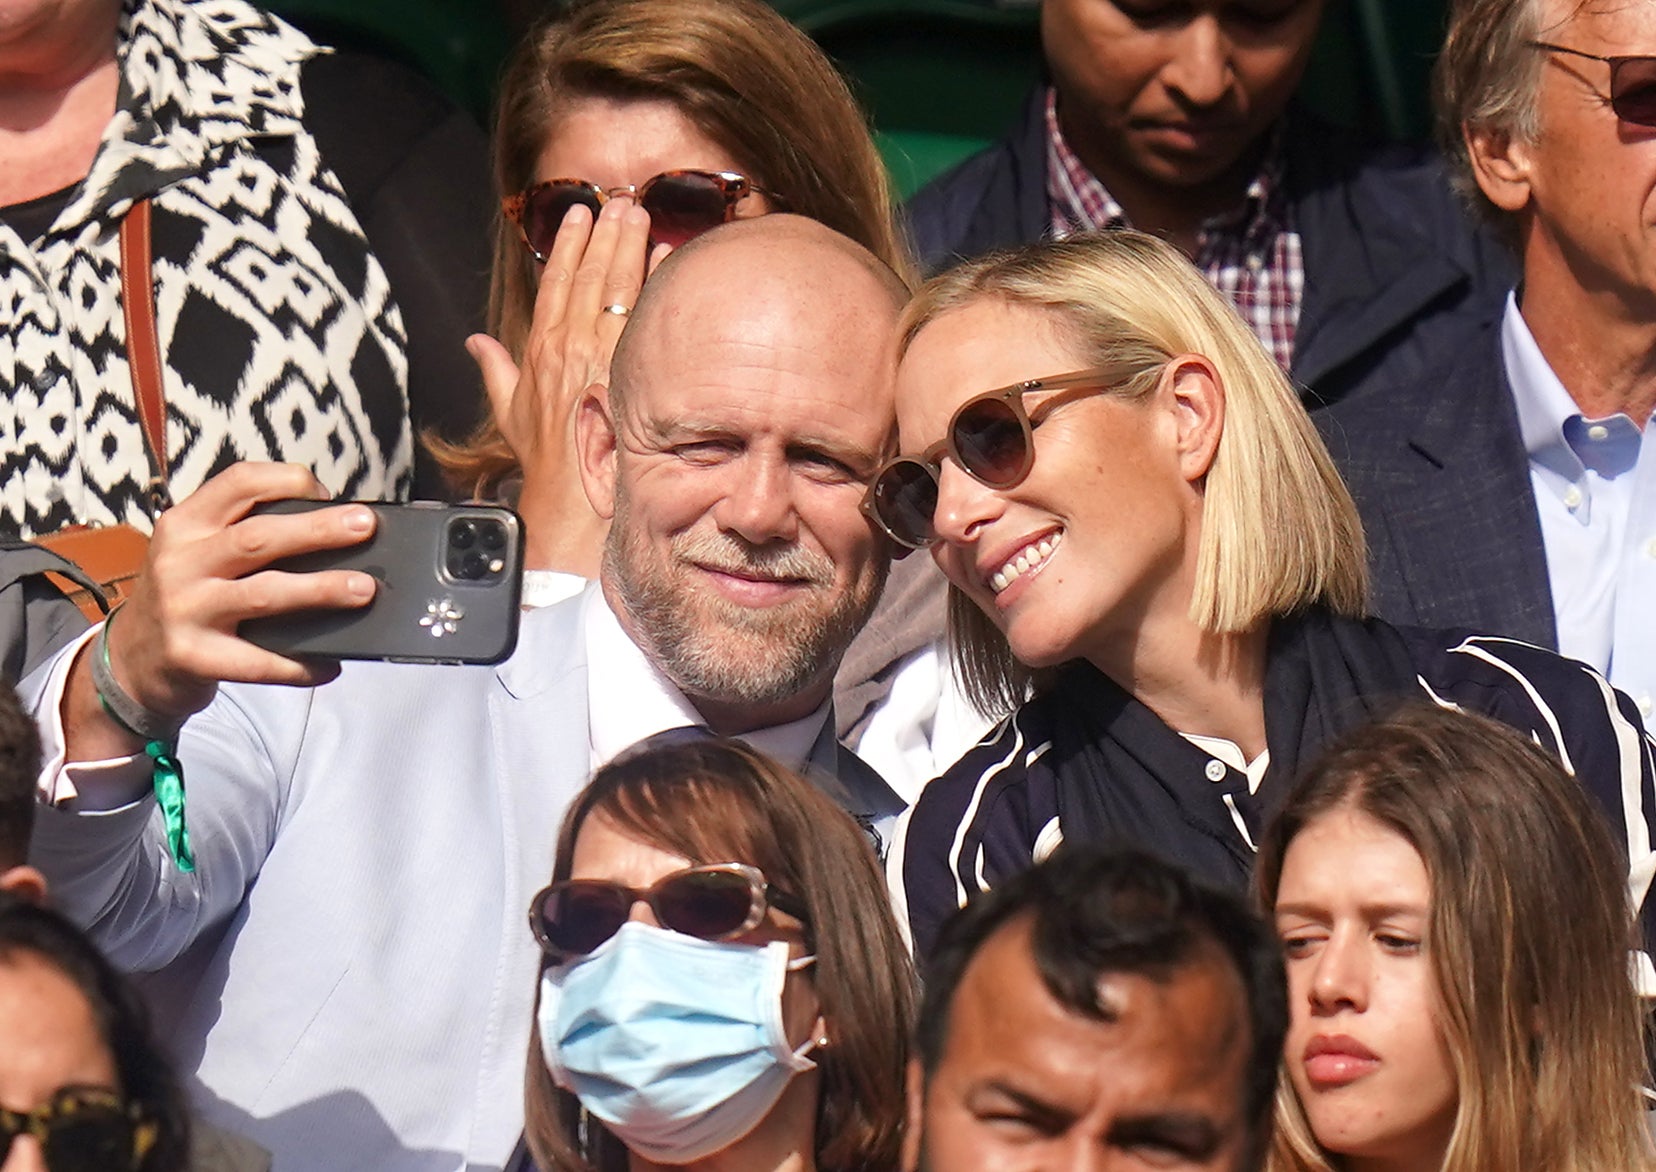 Mike Tindall and wife Zara were at Wembley for the Euro 2020 final having been at Wimbledon earlier in the week